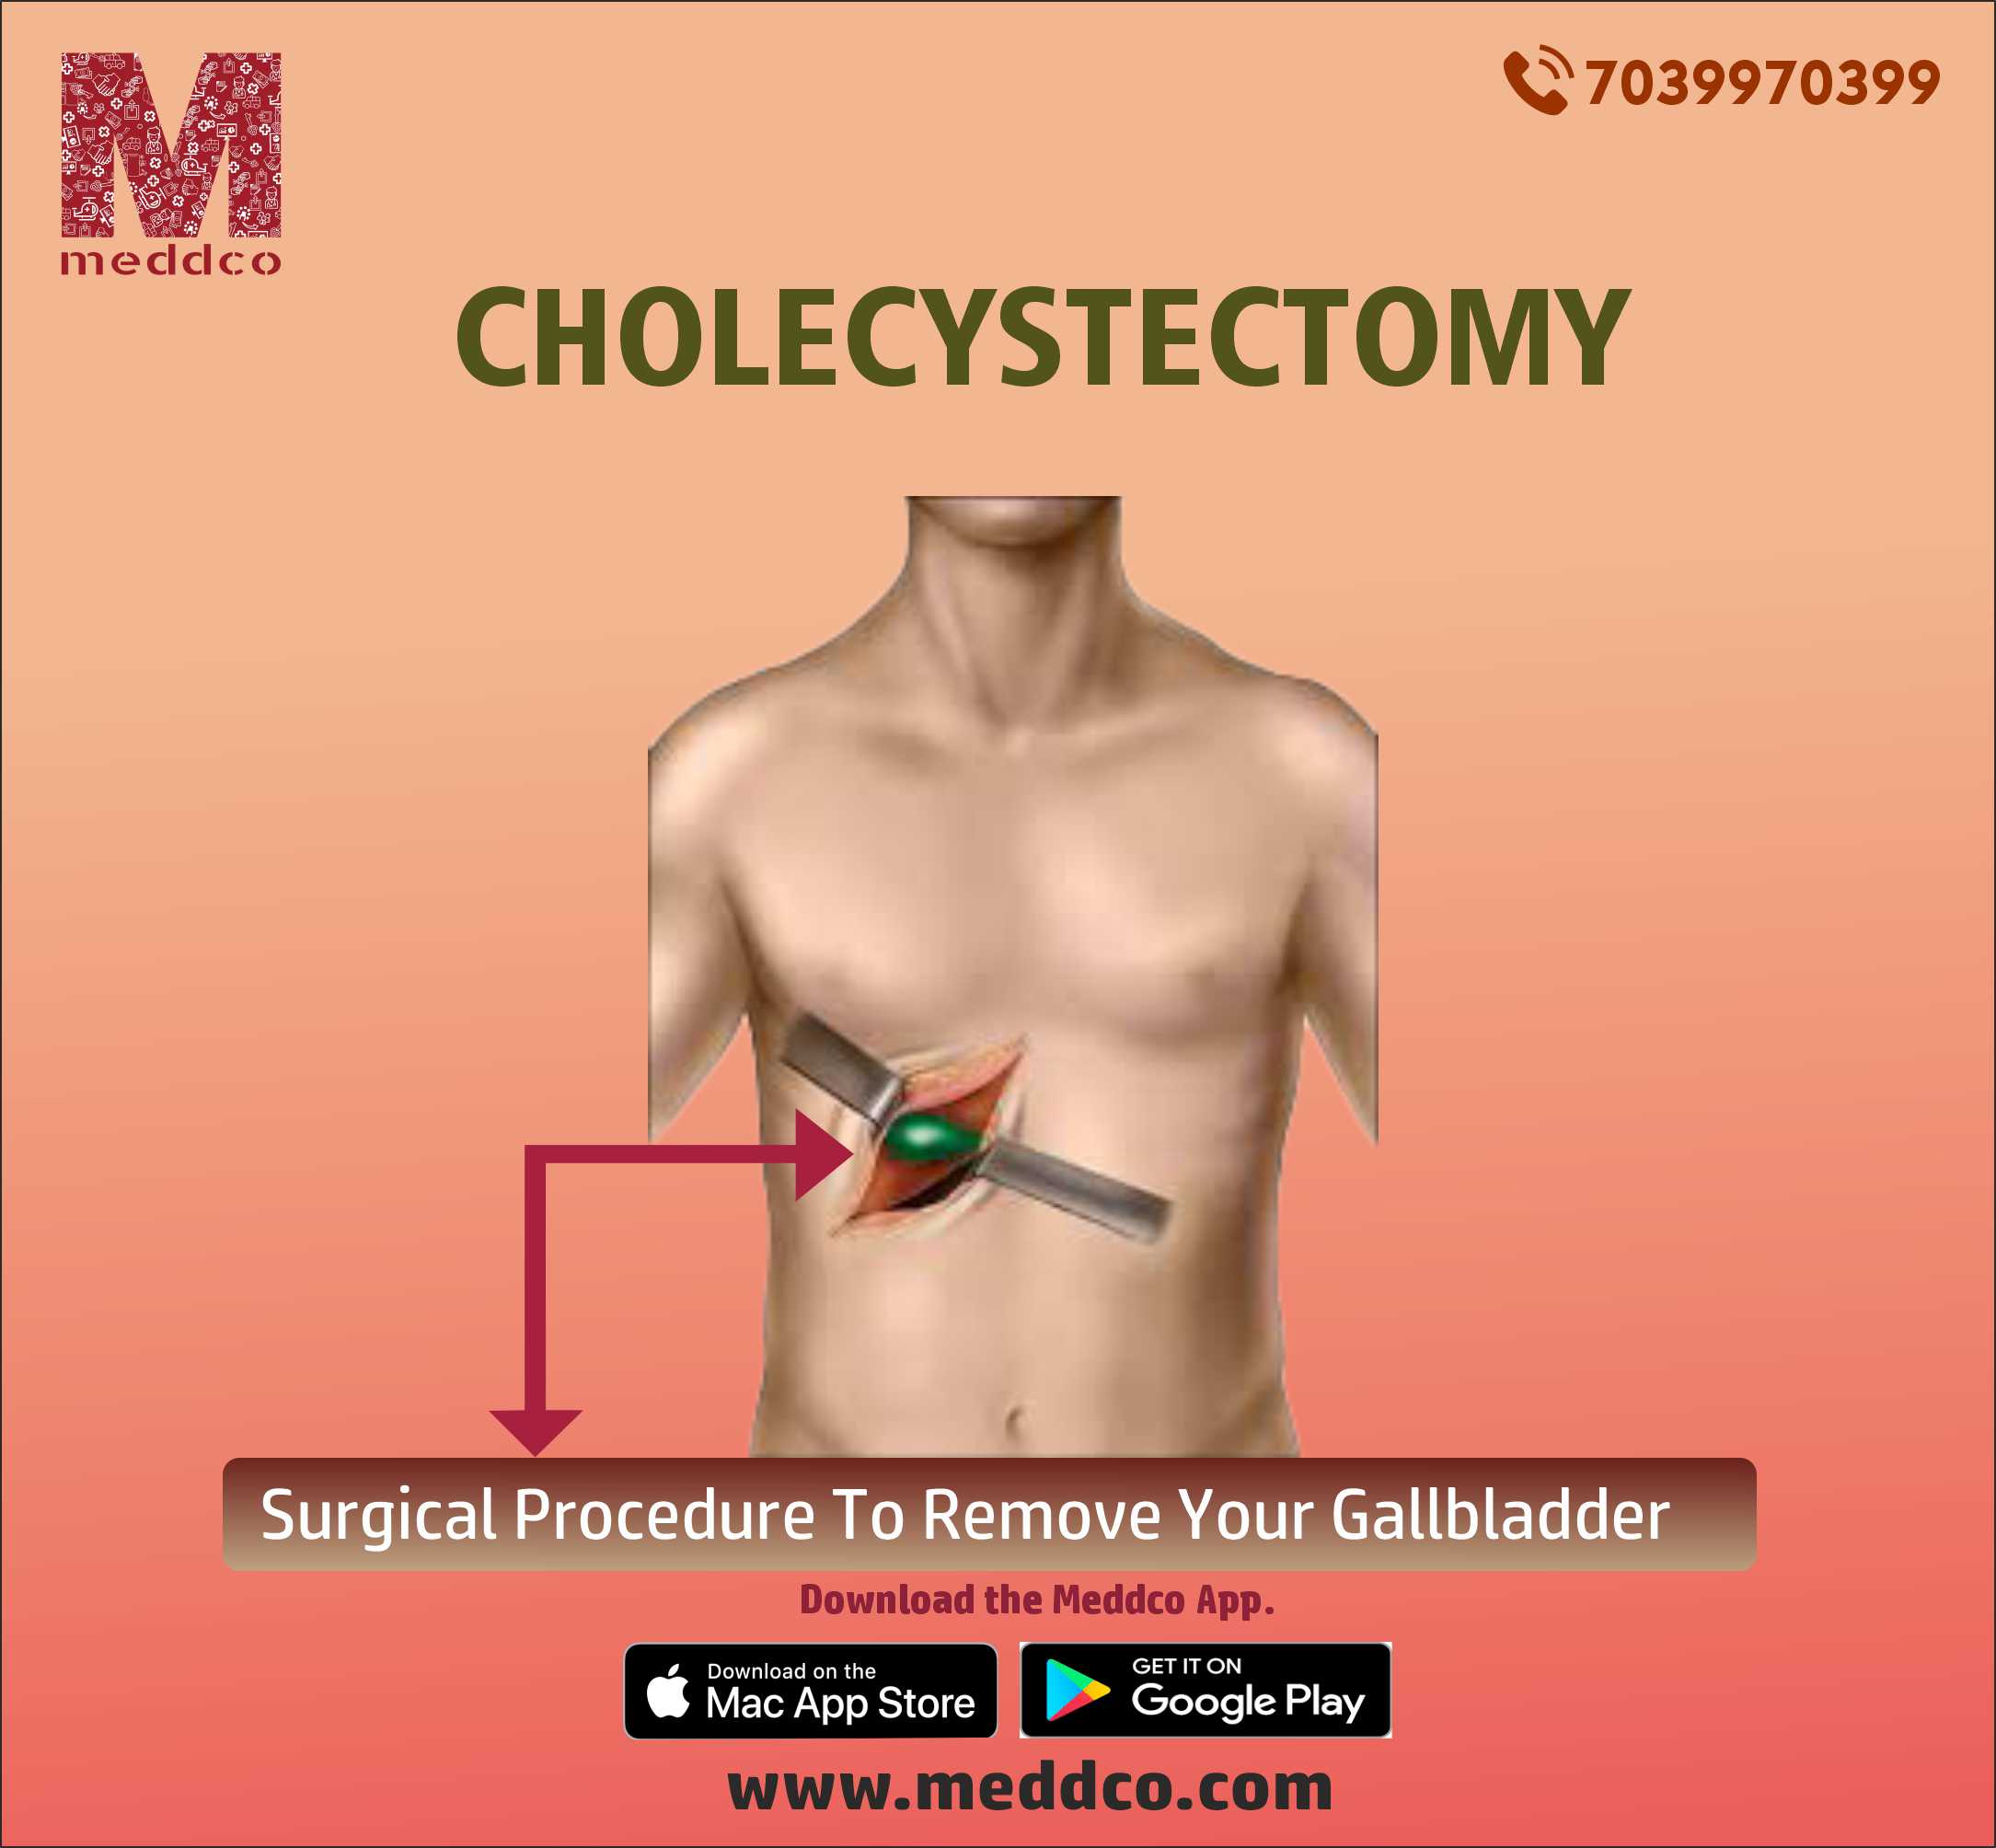 HOW TO PREPARE FOR THE GALLBLADDER SURGERY OR CHOLECYSTECTOMY?